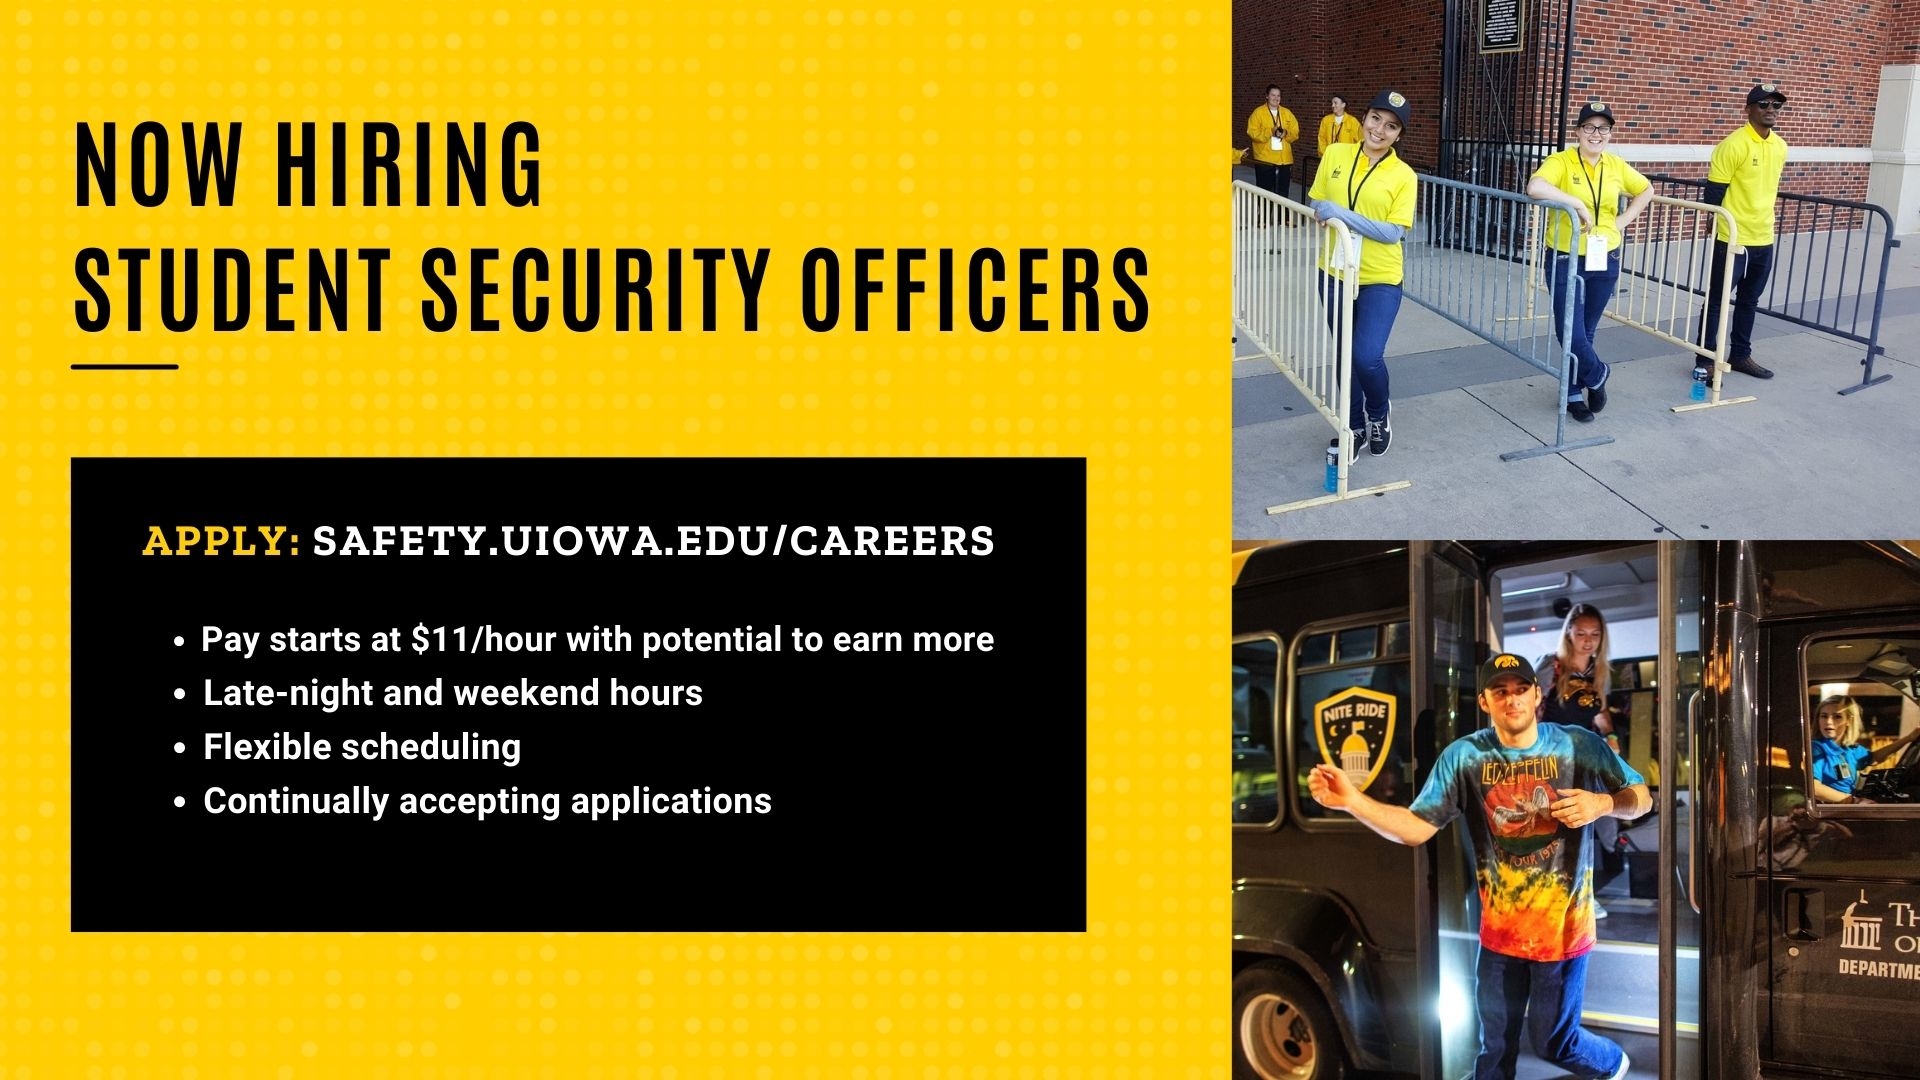 Now hiring student security officers apply at safety.uiowa.edu